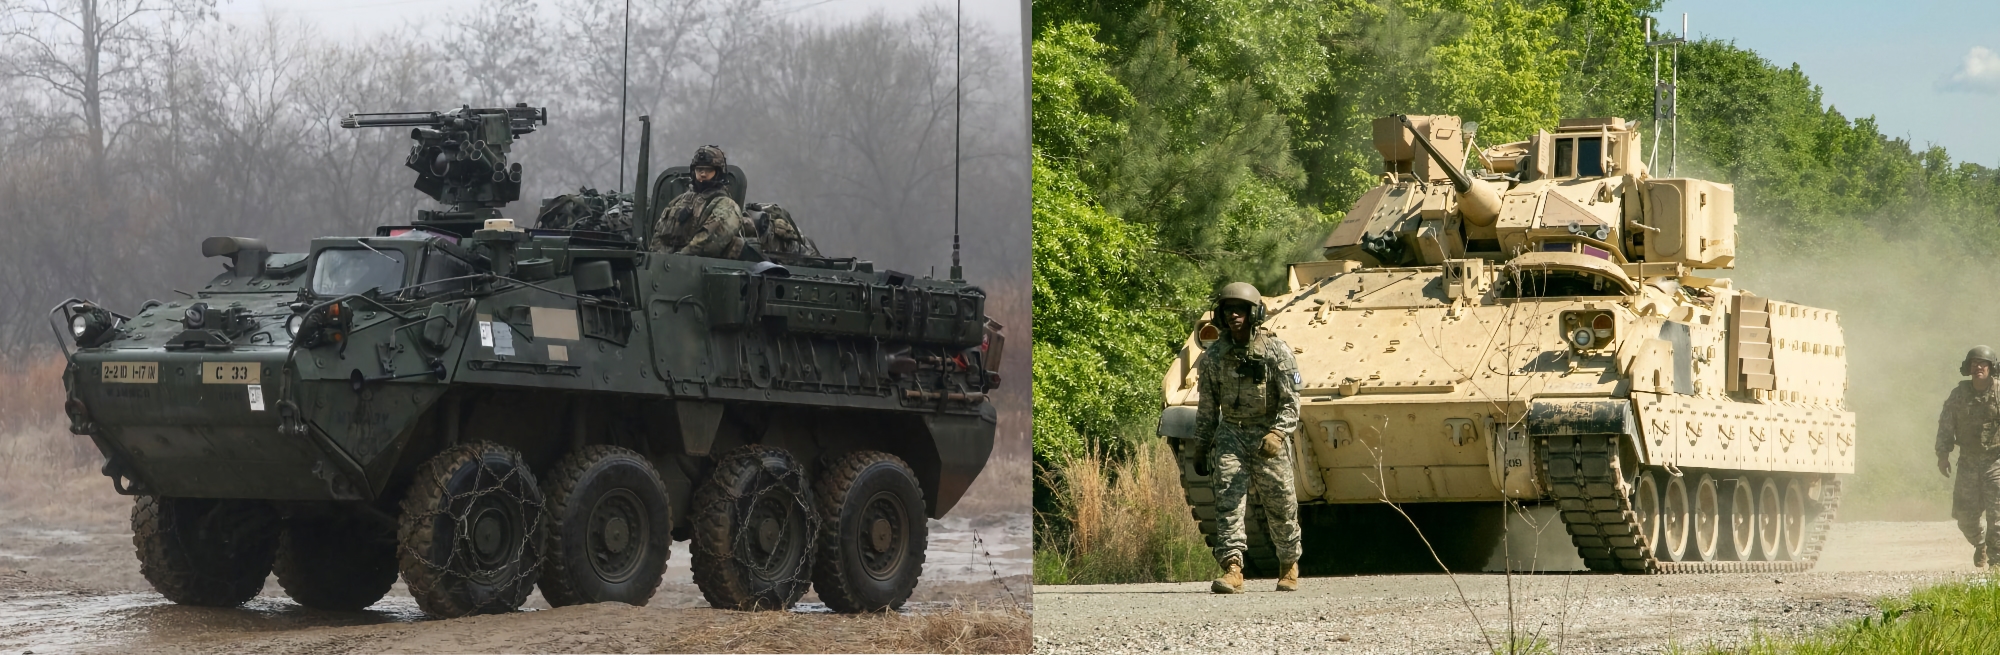 Bradley, Stryker infantry vehicles and ammunition for NASAMS SAMs: US prepares new $325,000,000 military aid package for Ukraine